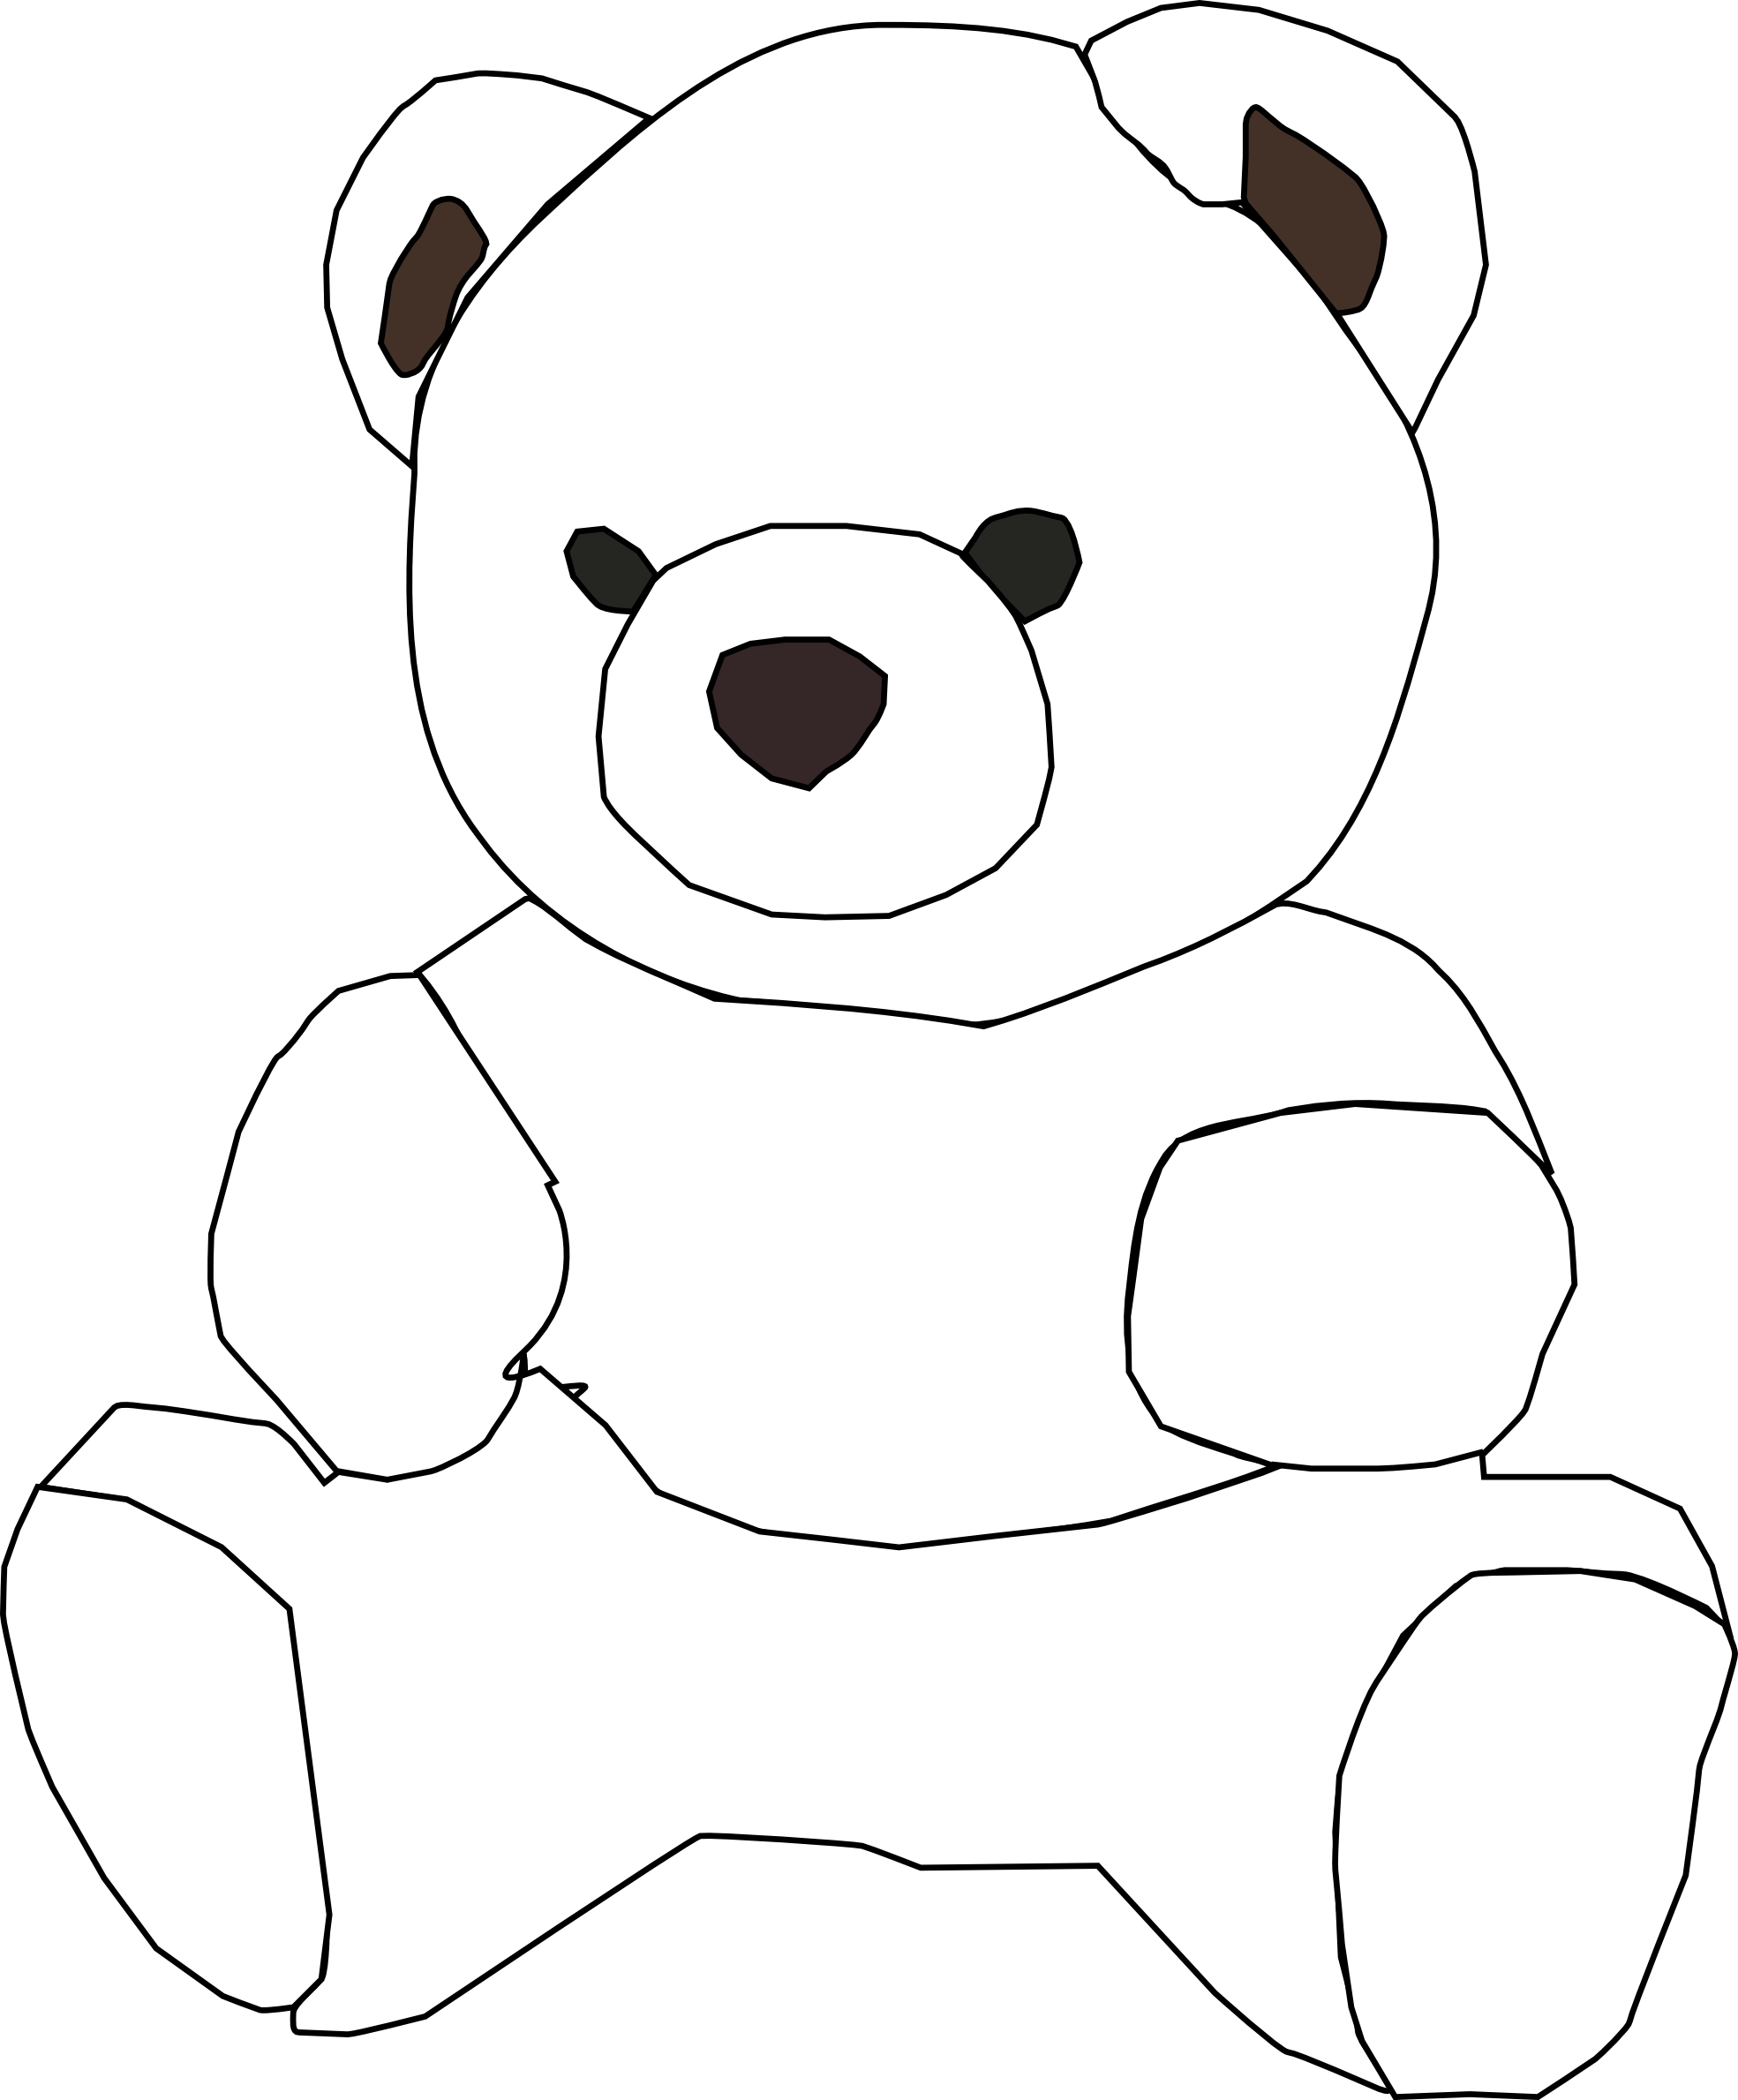 teddy bear clipart black and white - photo #4